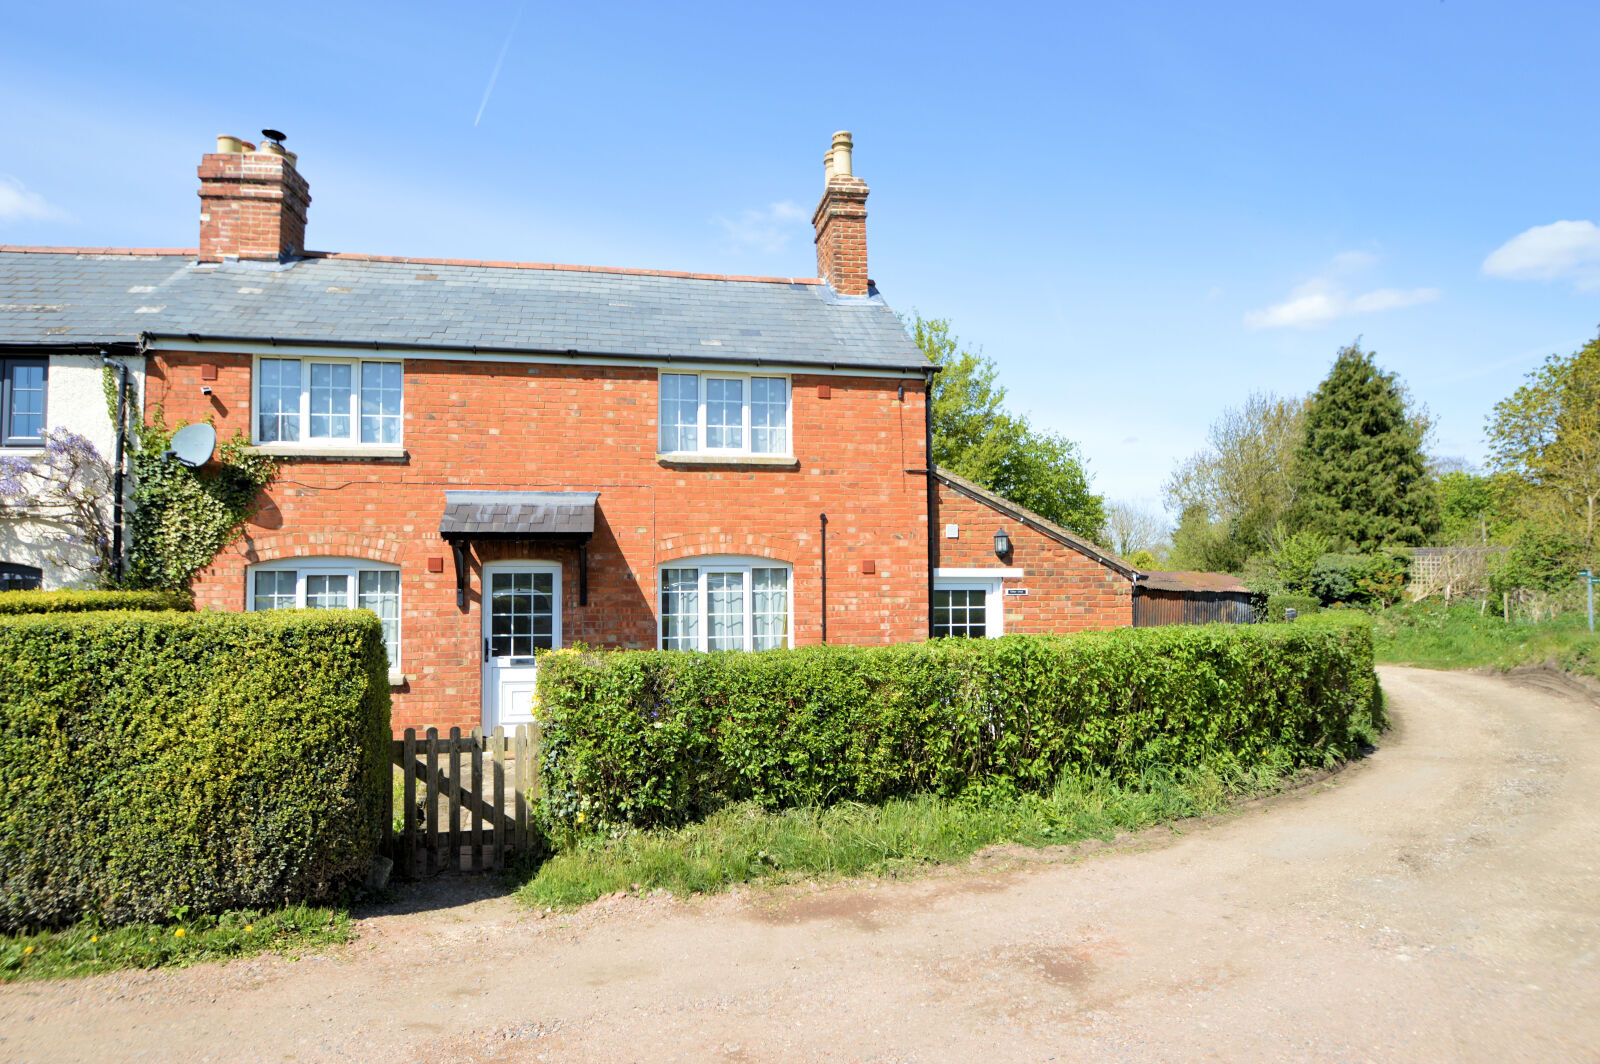 2 bedroom semi detached house to rent, Available from 13/06/2024 Cat Lane, Stadhampton, OX44, main image